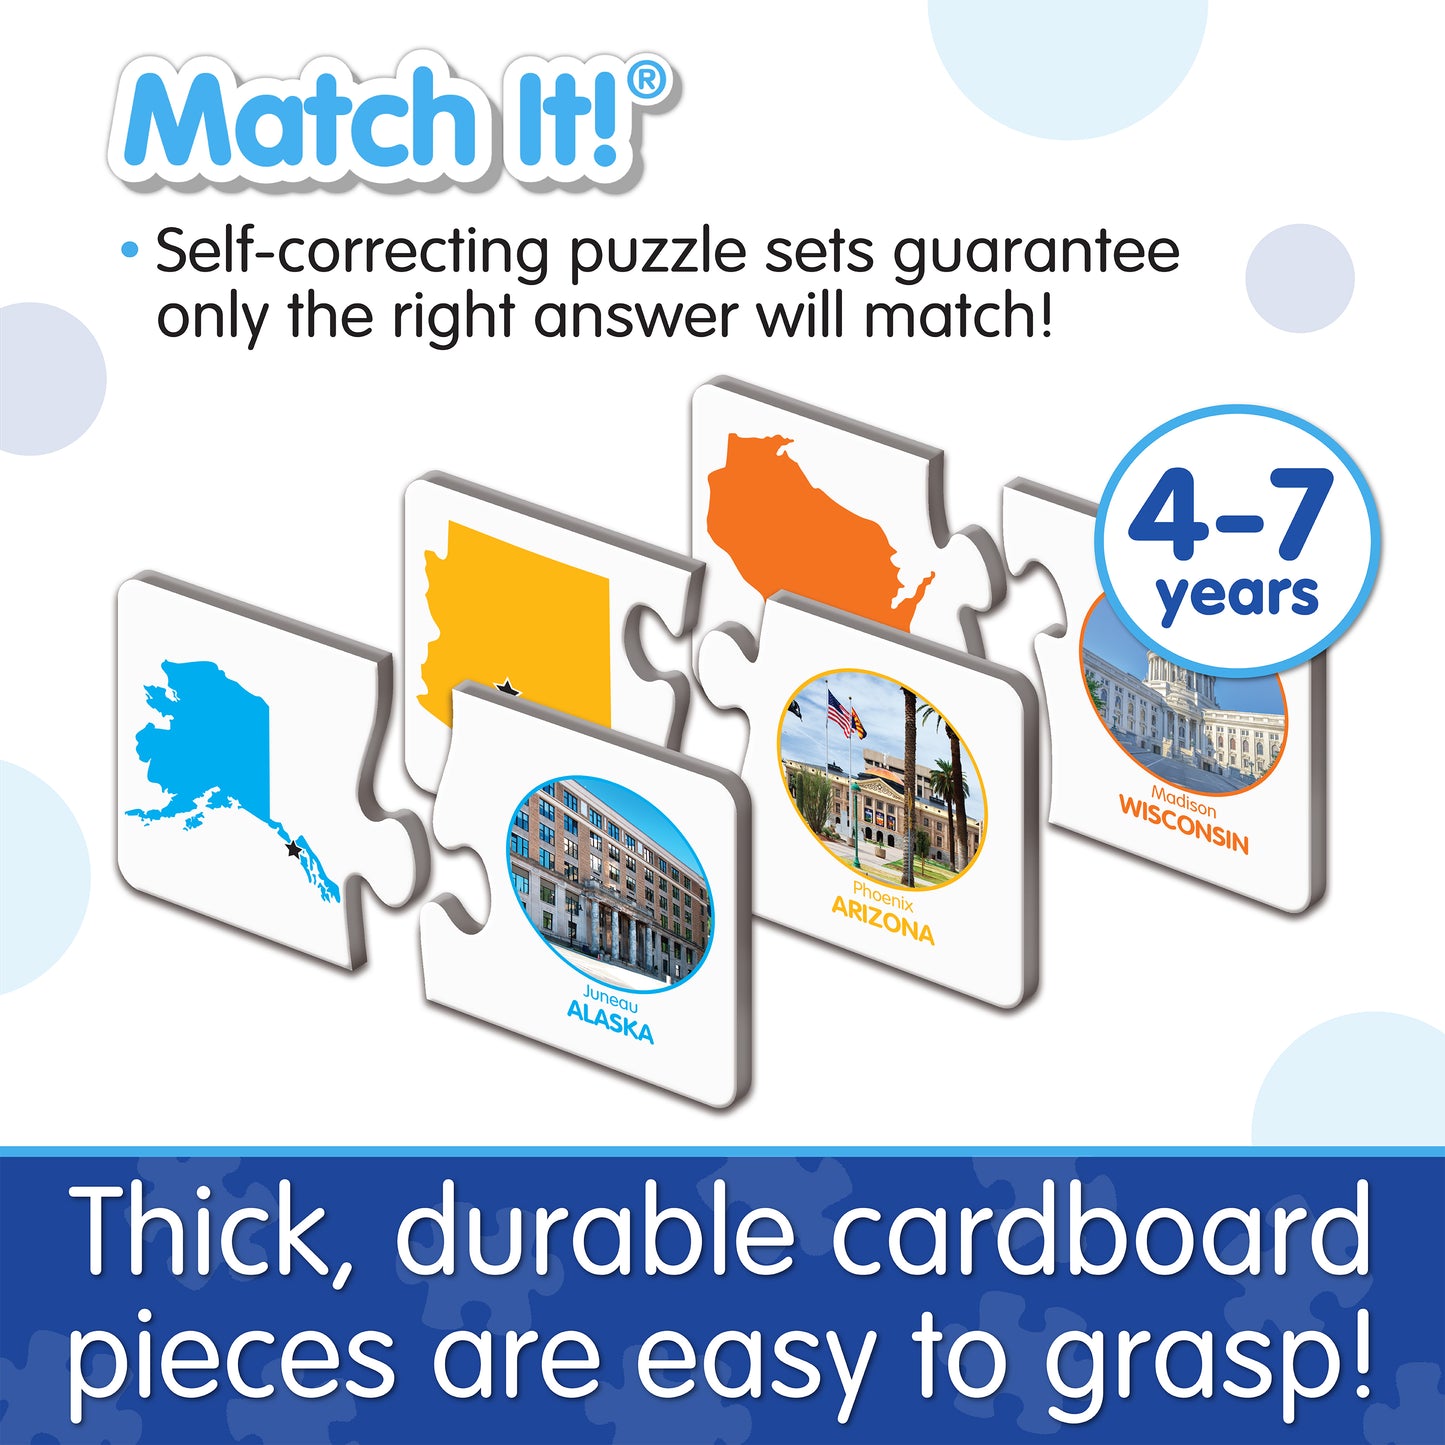 Infographic about Match It - States and Capitals' features that says, "Thick, durable cardboard pieces are easy to grasp!"